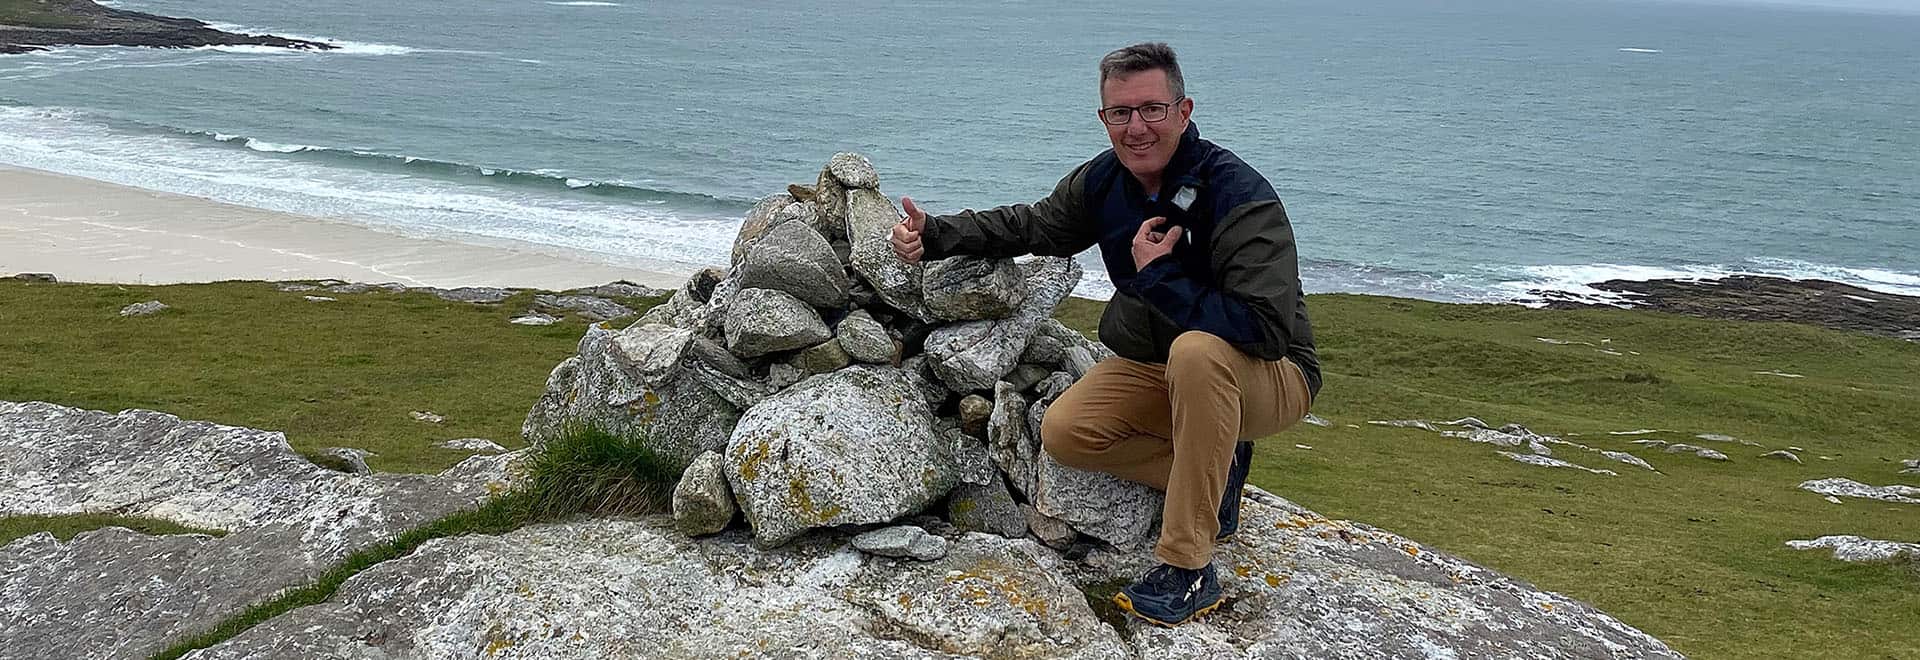 Rev. Max Wilkins on the Outer Hebrides, Scotland. (Photo courtesy of Max Wilkins)
